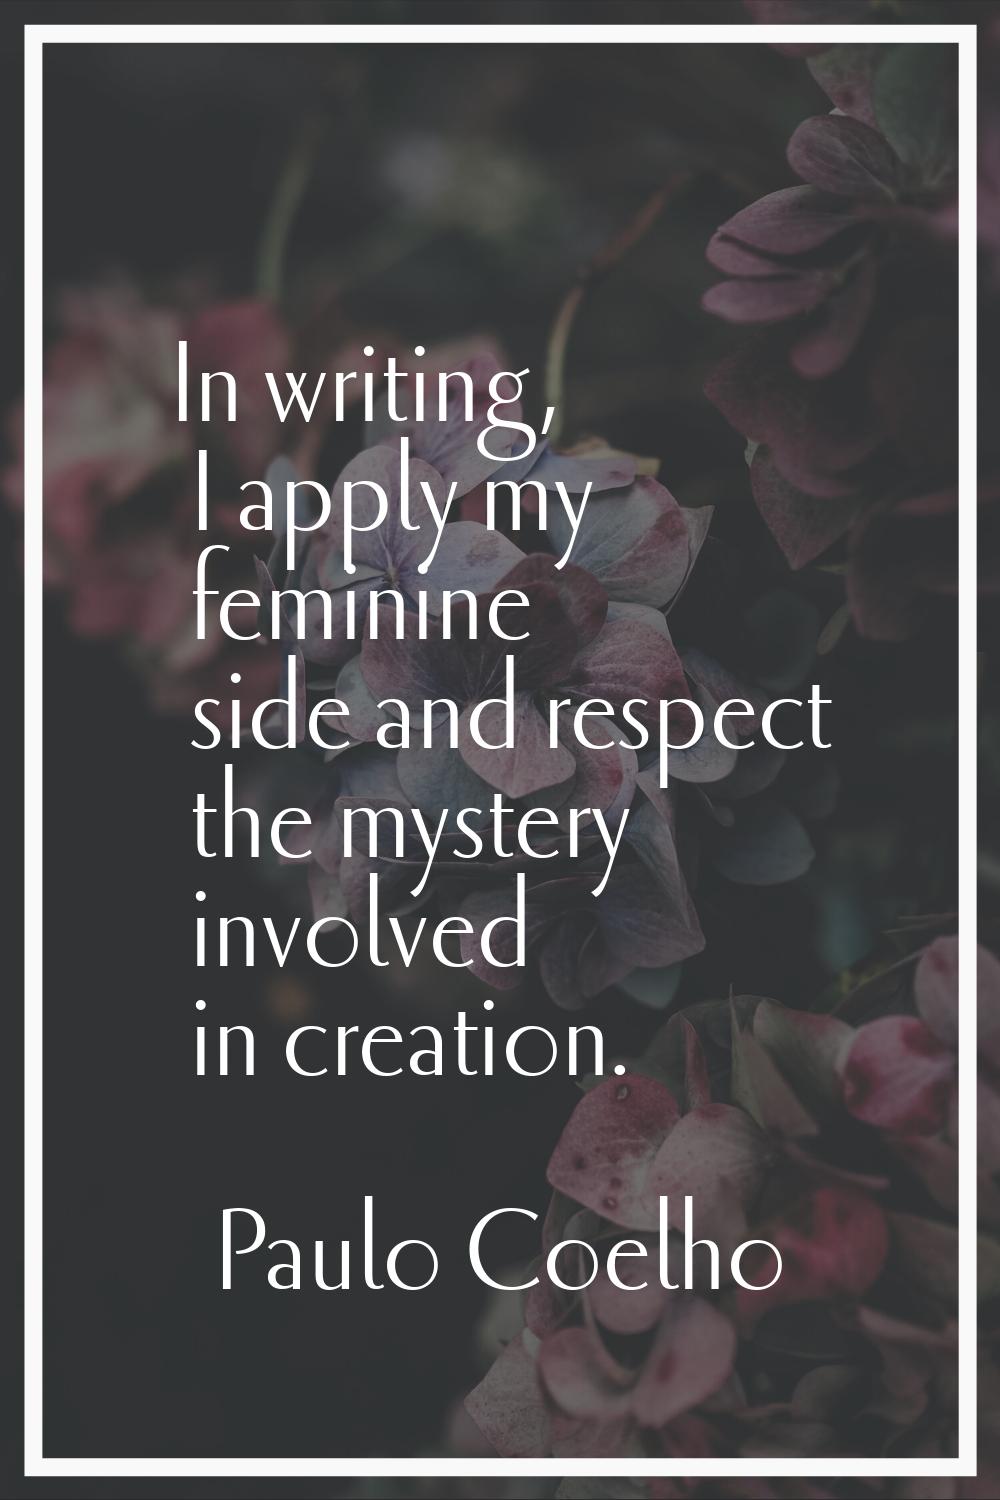 In writing, I apply my feminine side and respect the mystery involved in creation.